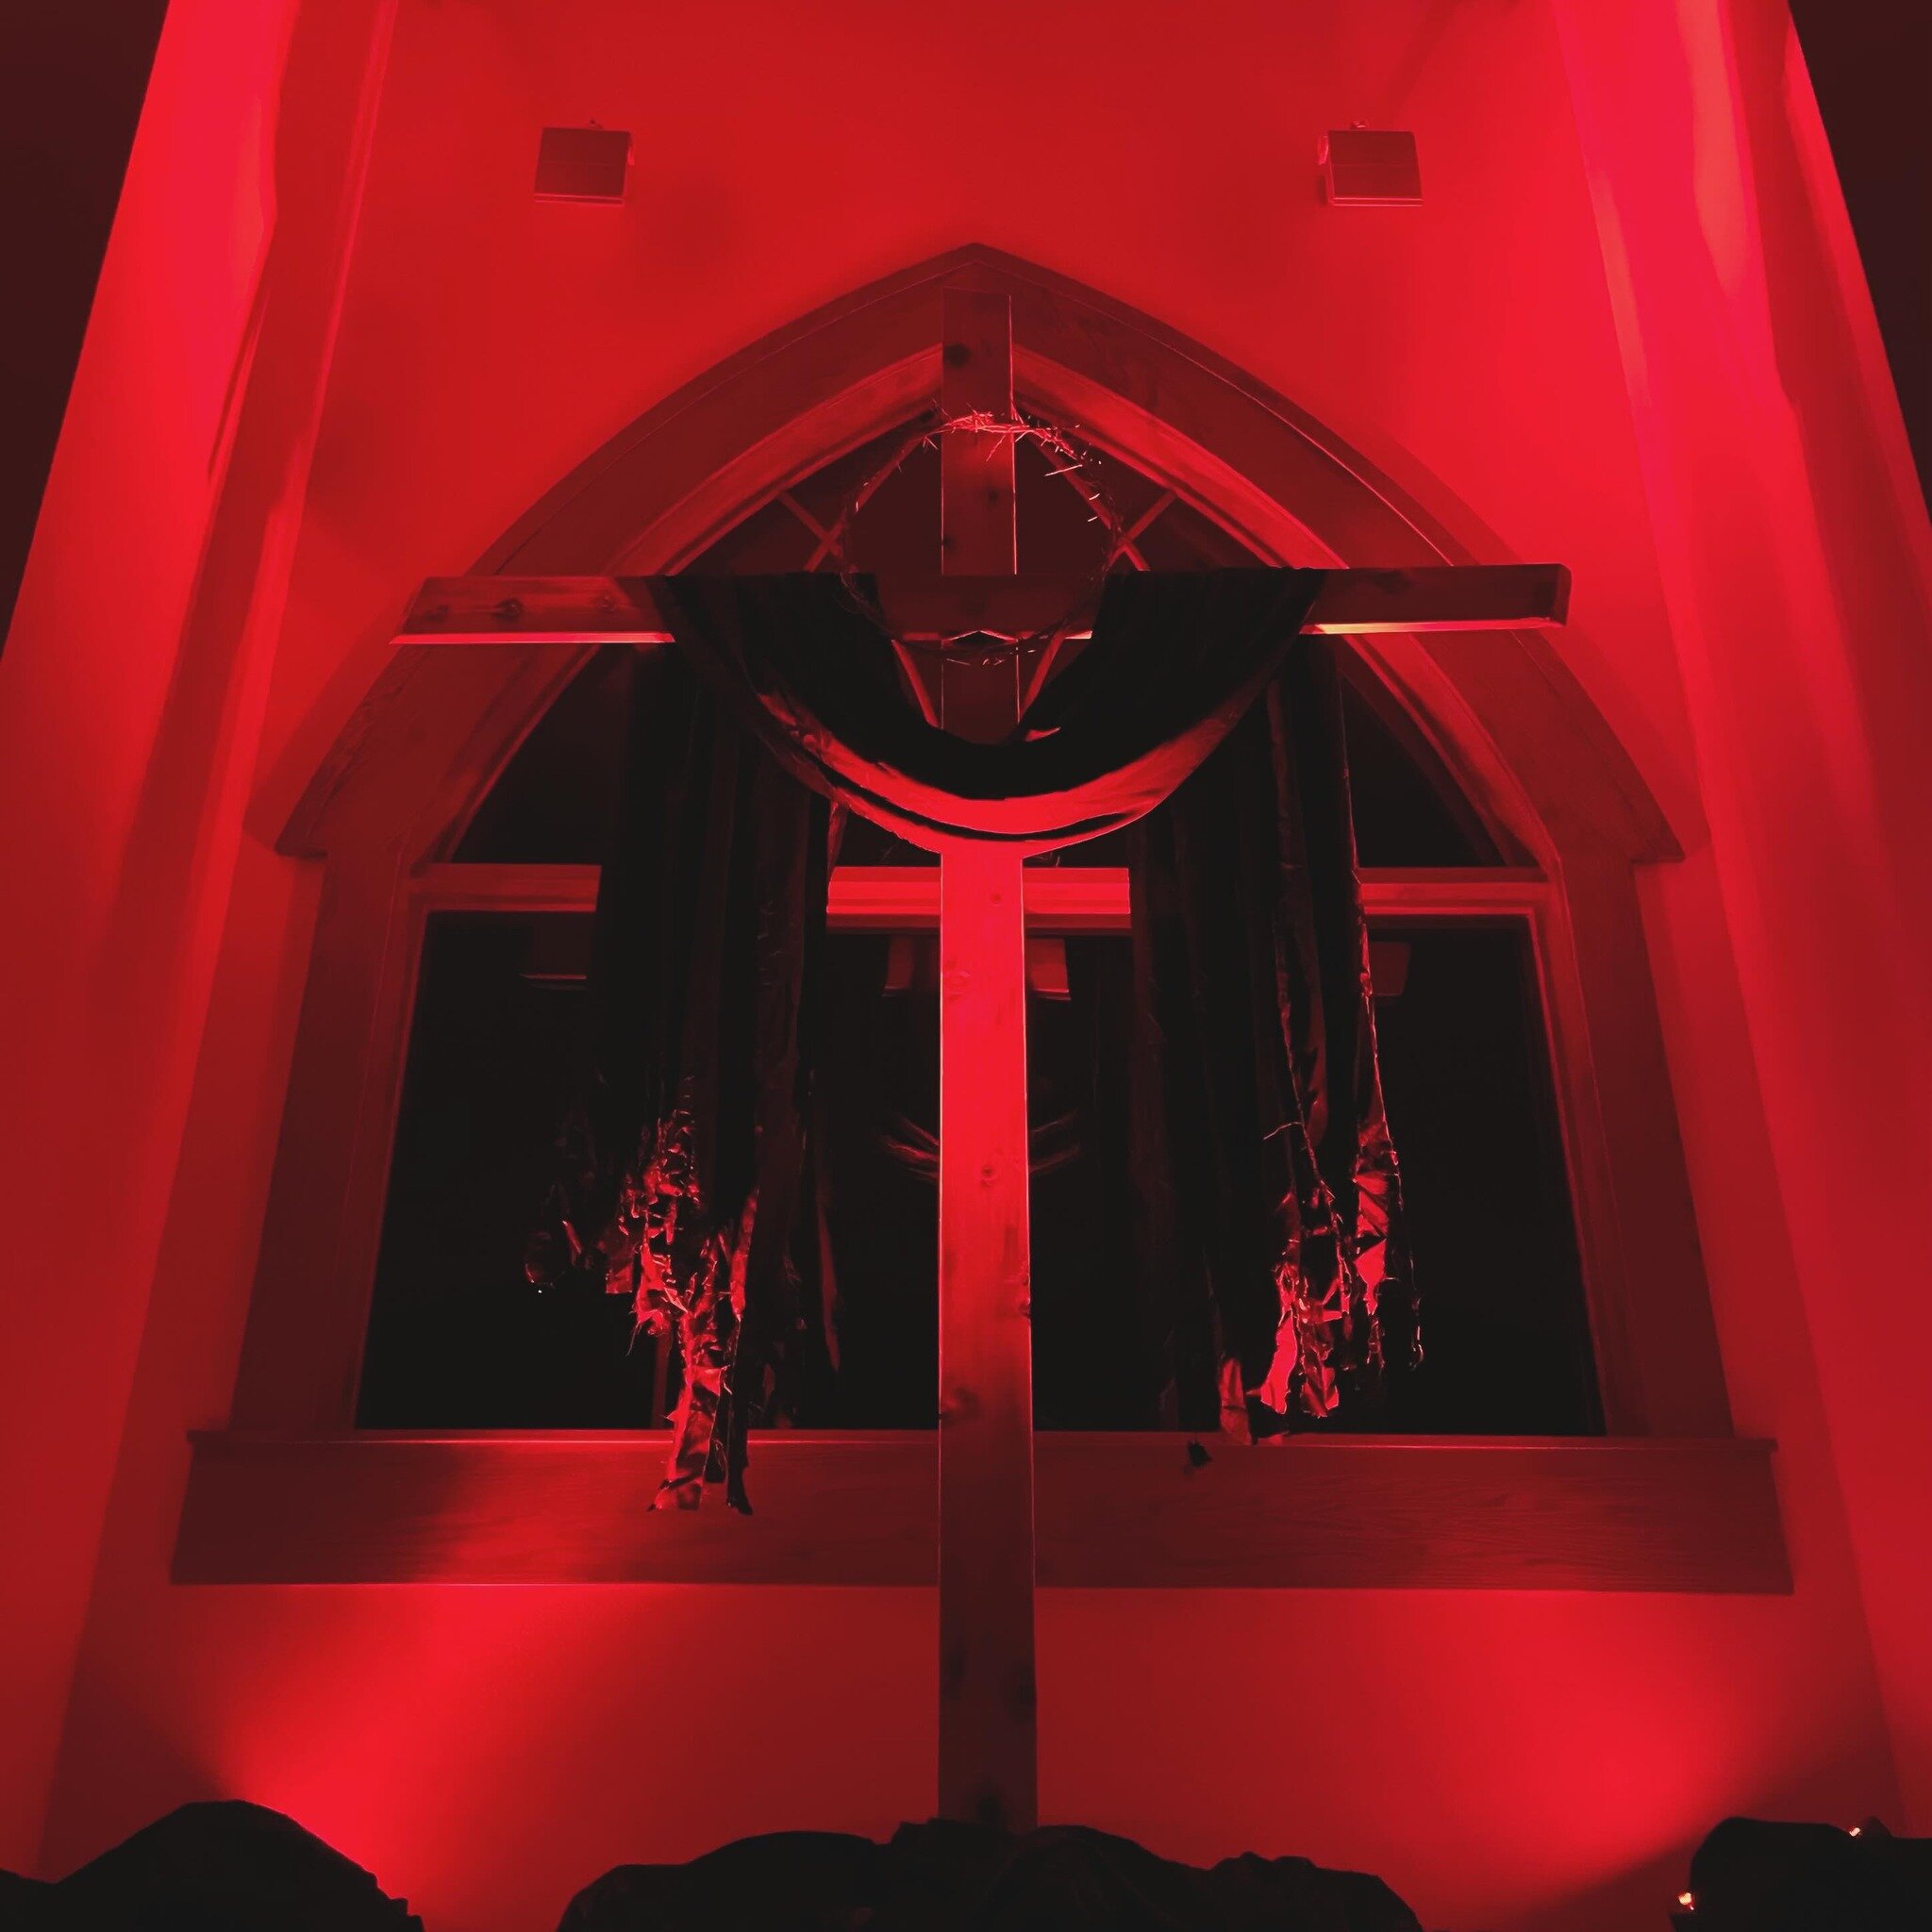 The emblem of suffering and shame&hellip; join us for Tenebrae Service at 7pm. #goodfriday #tenebrae